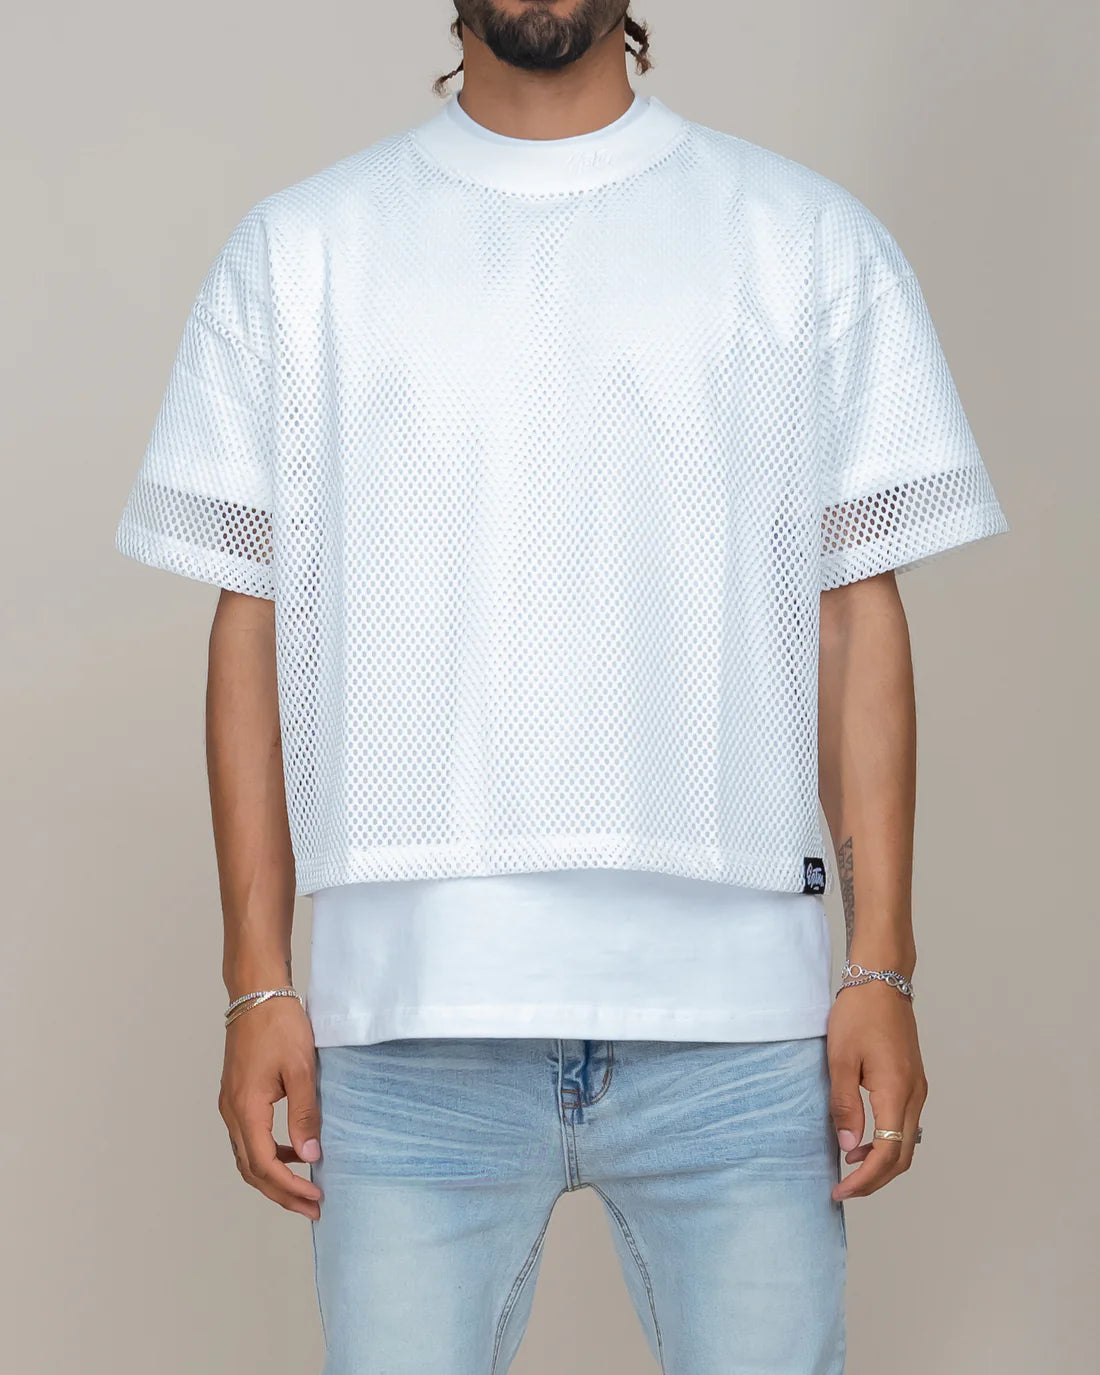 EPTEM MESH STADIUM JERSEY IN WHITE (MALE MODEL front view) -8586